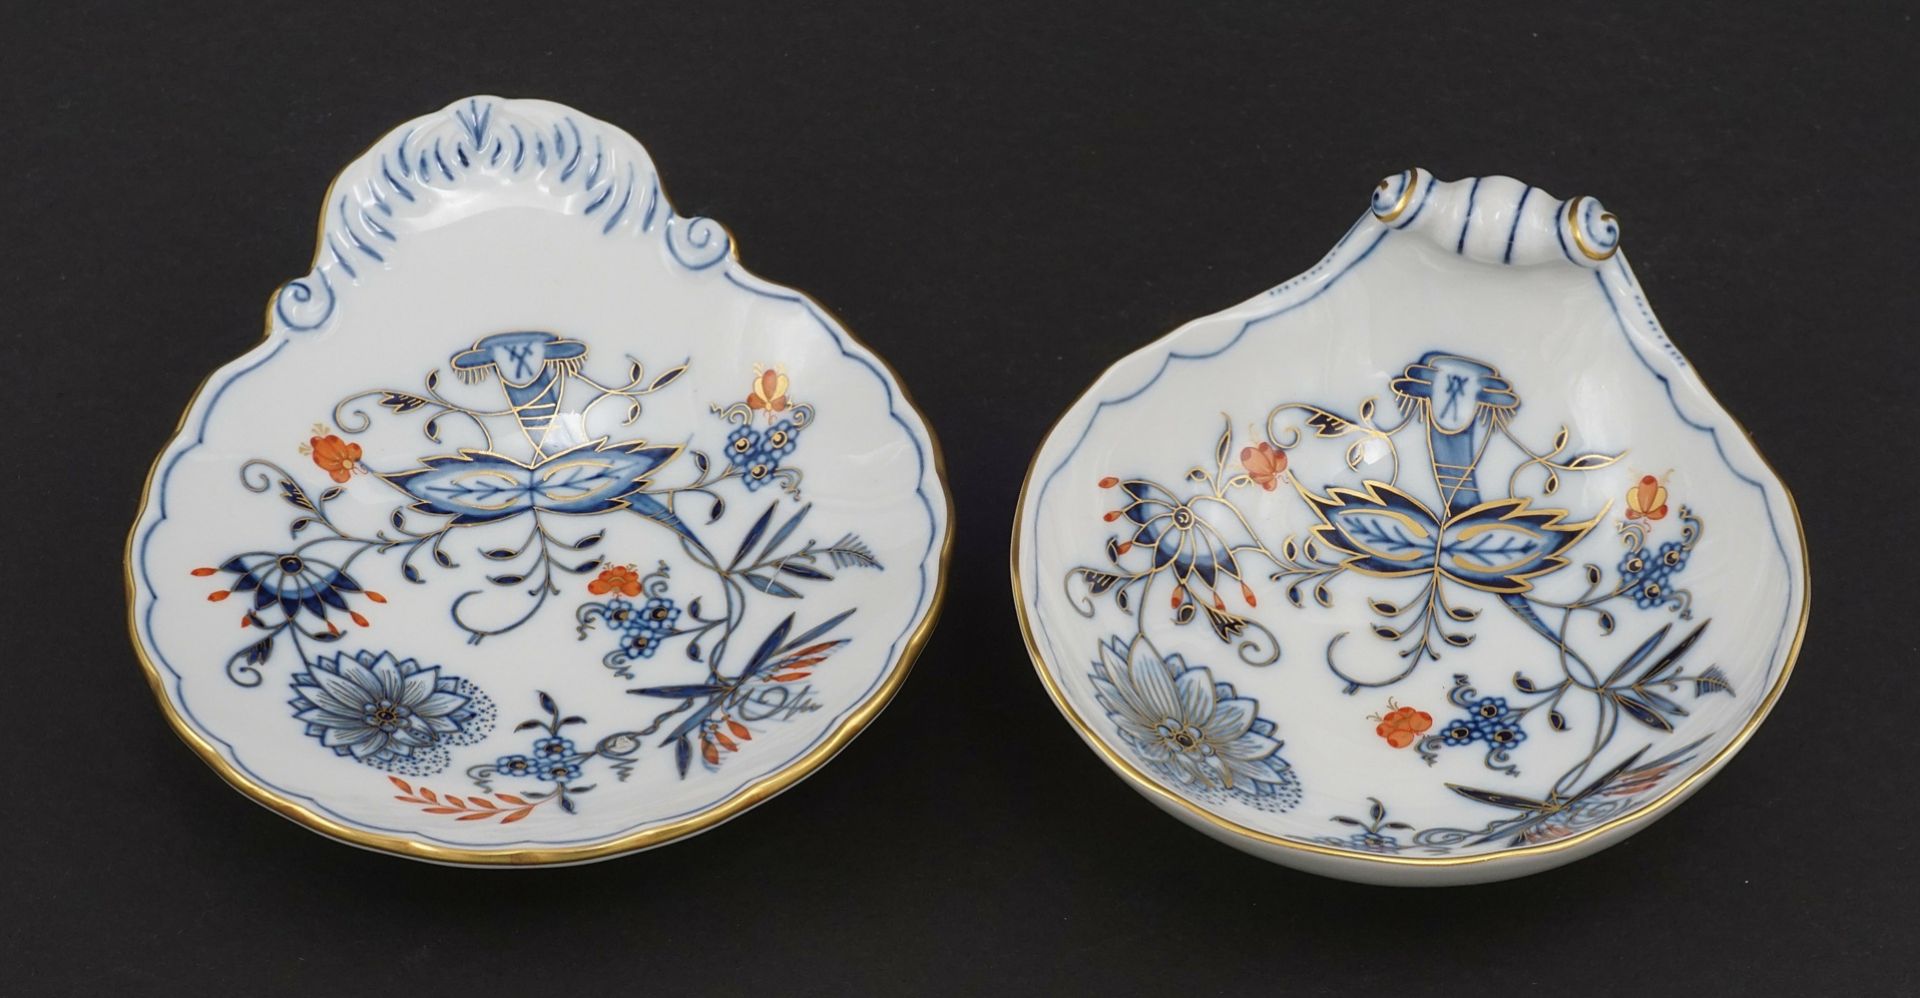 Two Meissen bowls with a colorful onion pattern   - Image 2 of 3